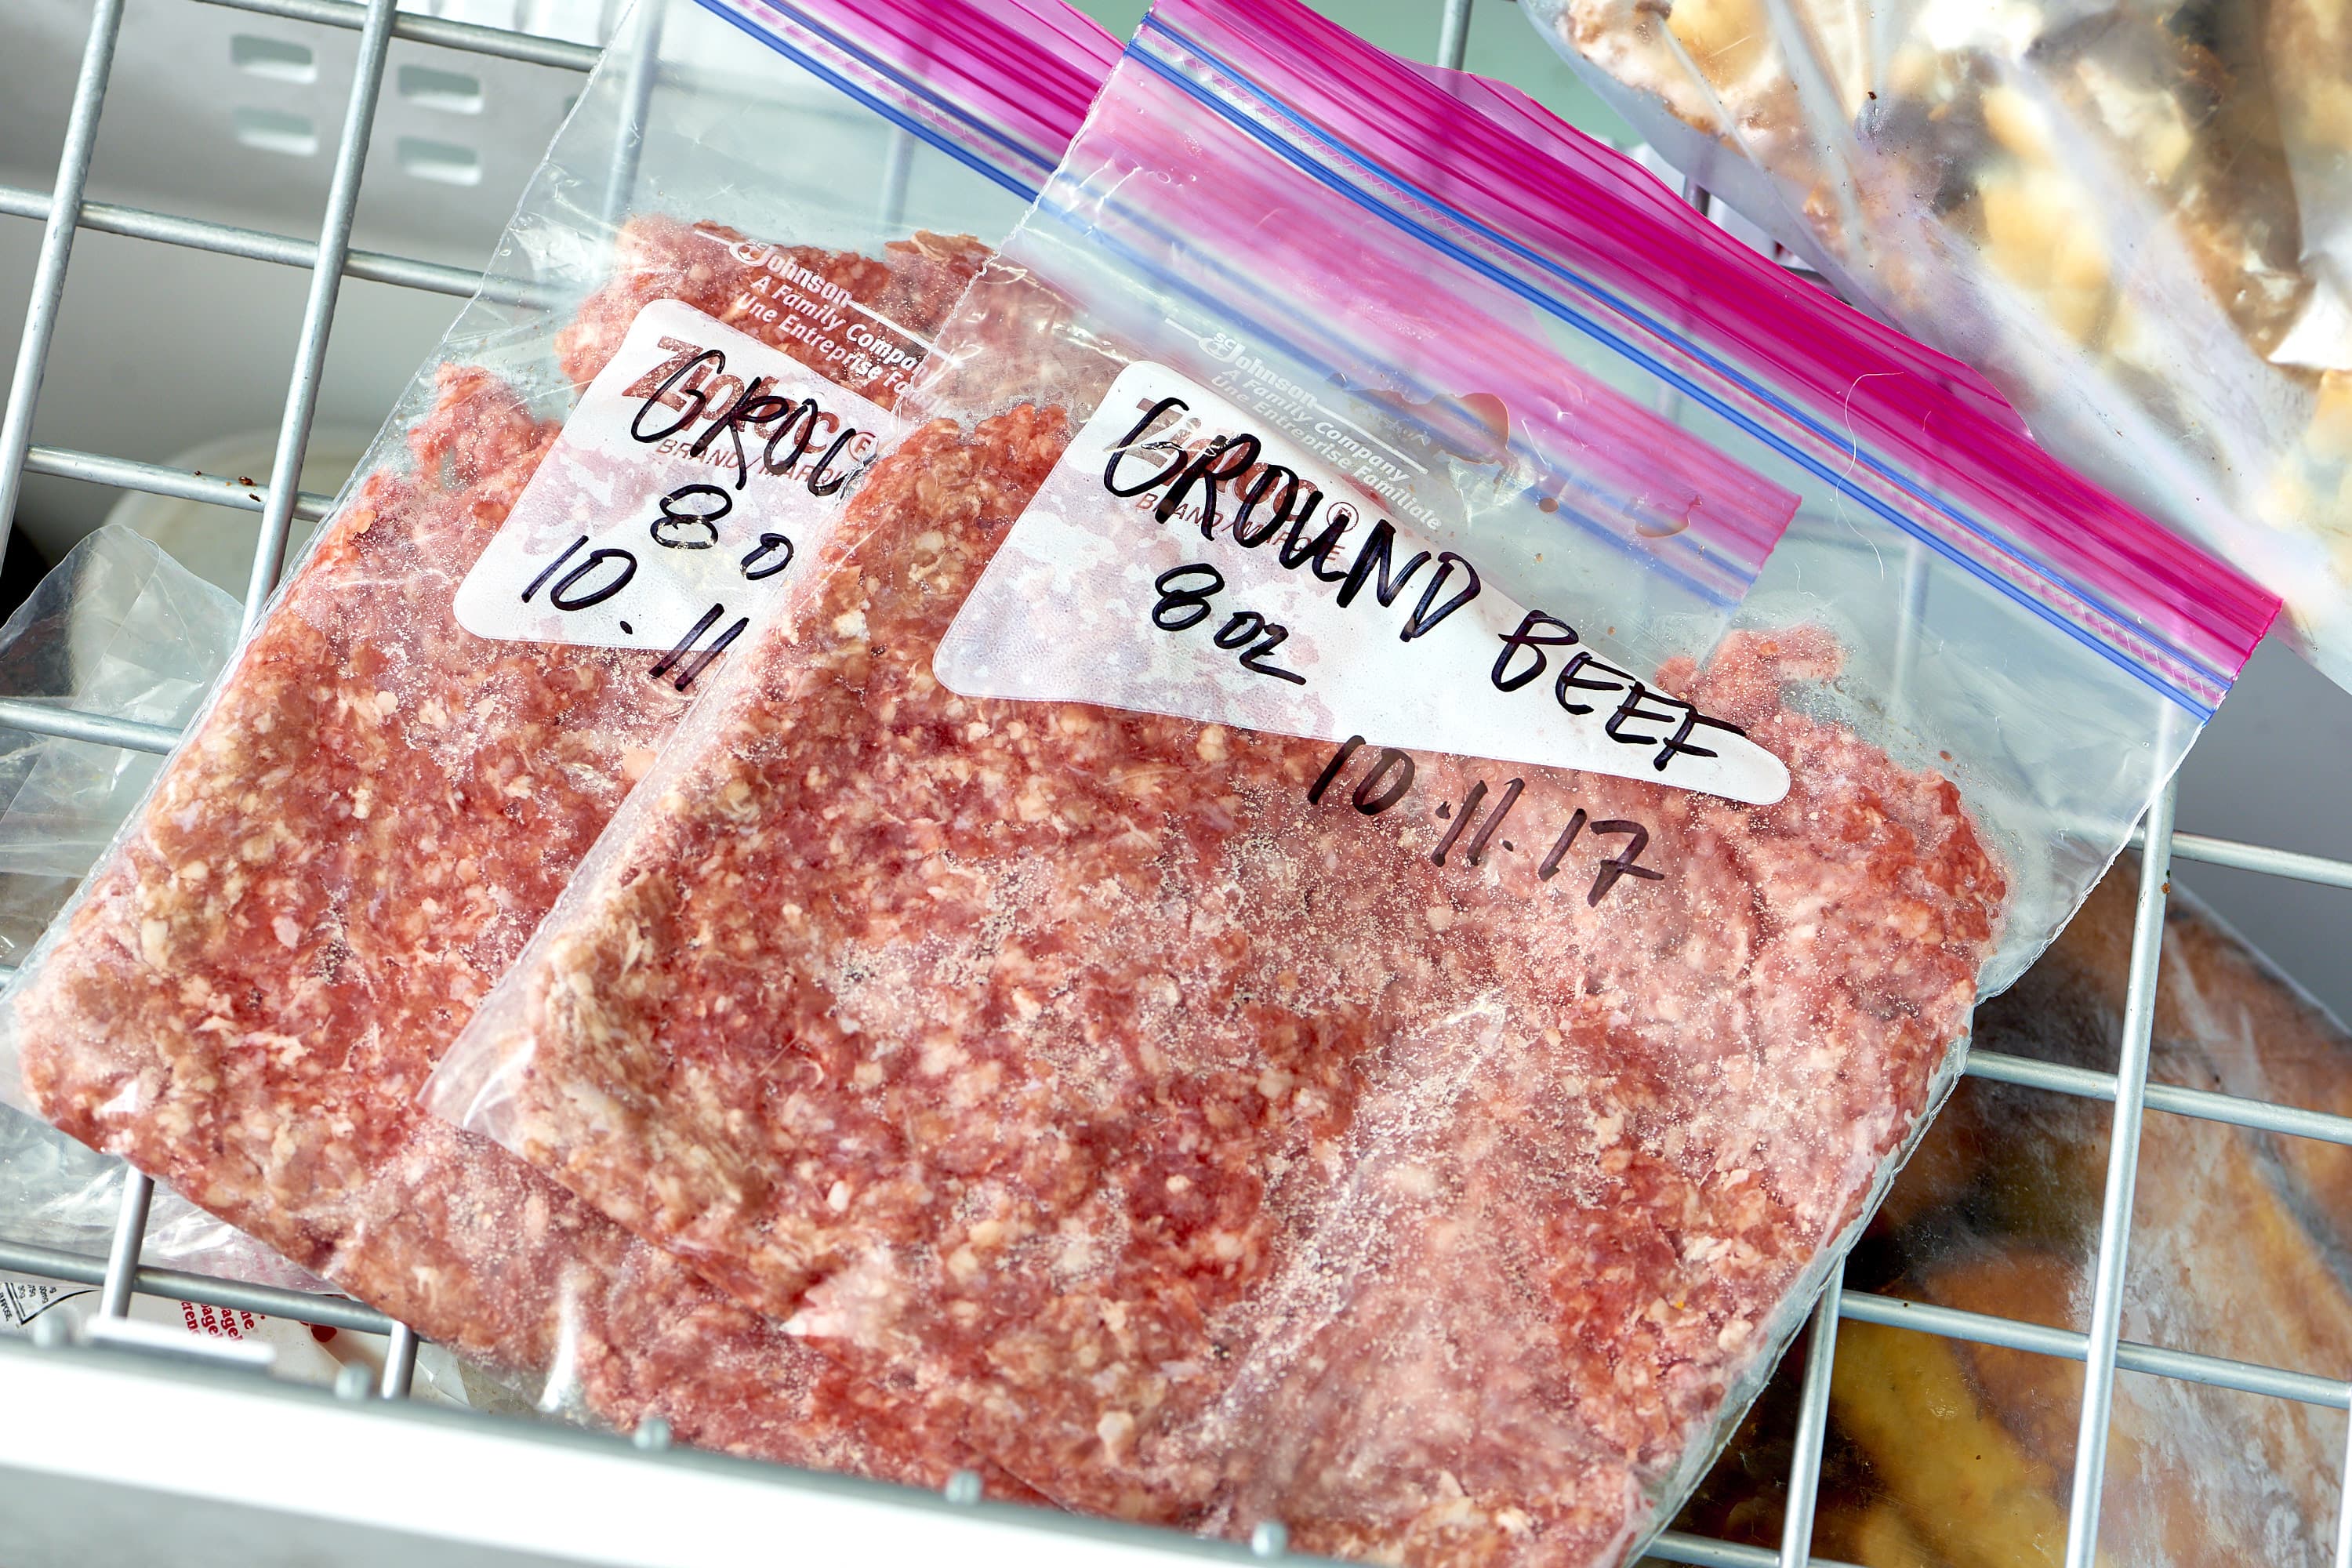 Individually wrap portions of meat to prevent freezer burn - CNET